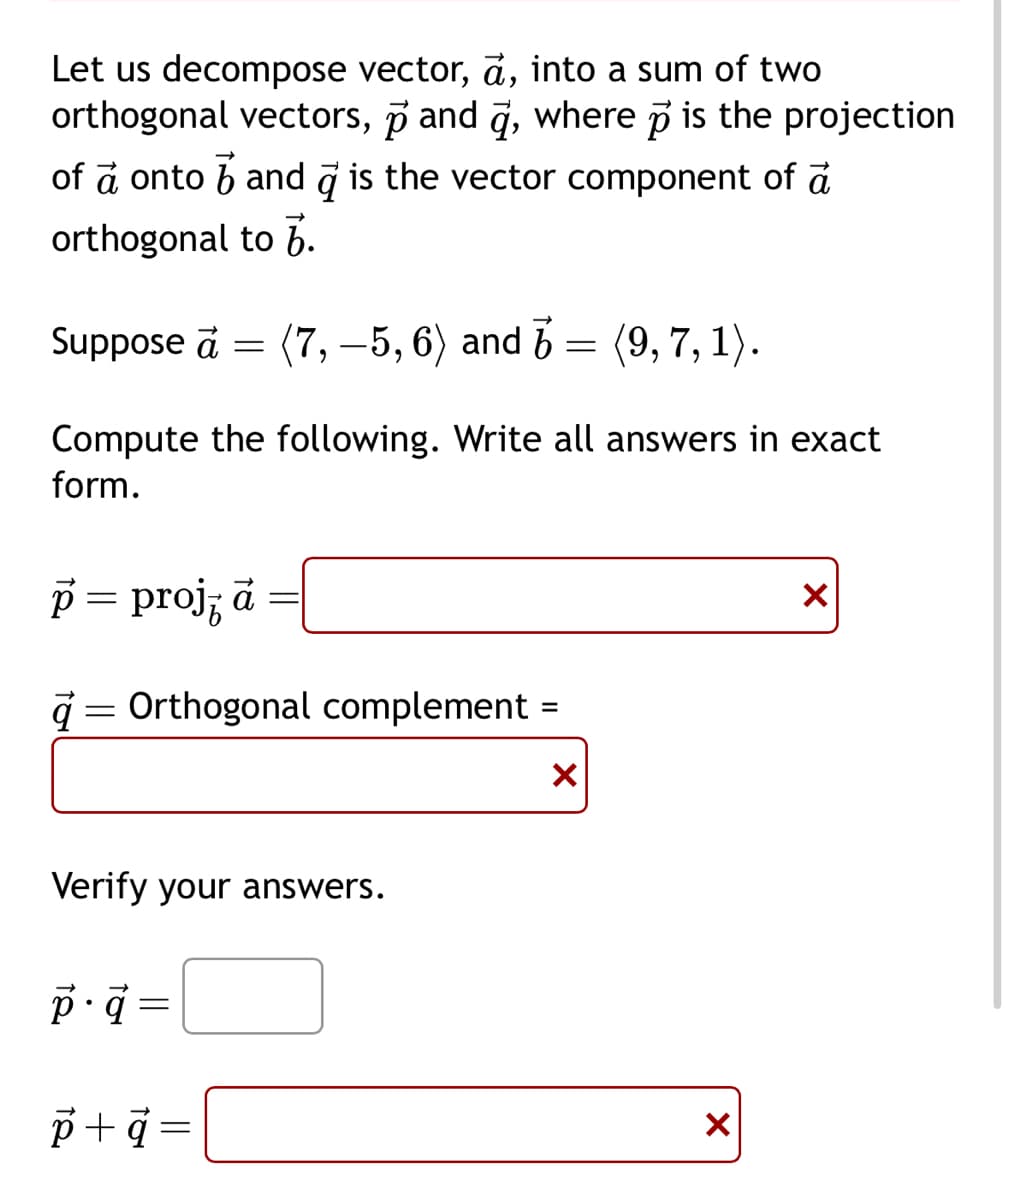 Let us decompose vector, a, into a sum of two
orthogonal vectors, p and d, where p is the projection
of a onto and is the vector component of a
orthogonal
to 7.
(7,-5, 6) and 5 = (9, 7, 1).
Compute the following. Write all answers in exact
form.
Suppose a
p = projz ā
=
à Orthogonal complement =
=
X
Verify your answers.
p.q=
p+q=
X
X